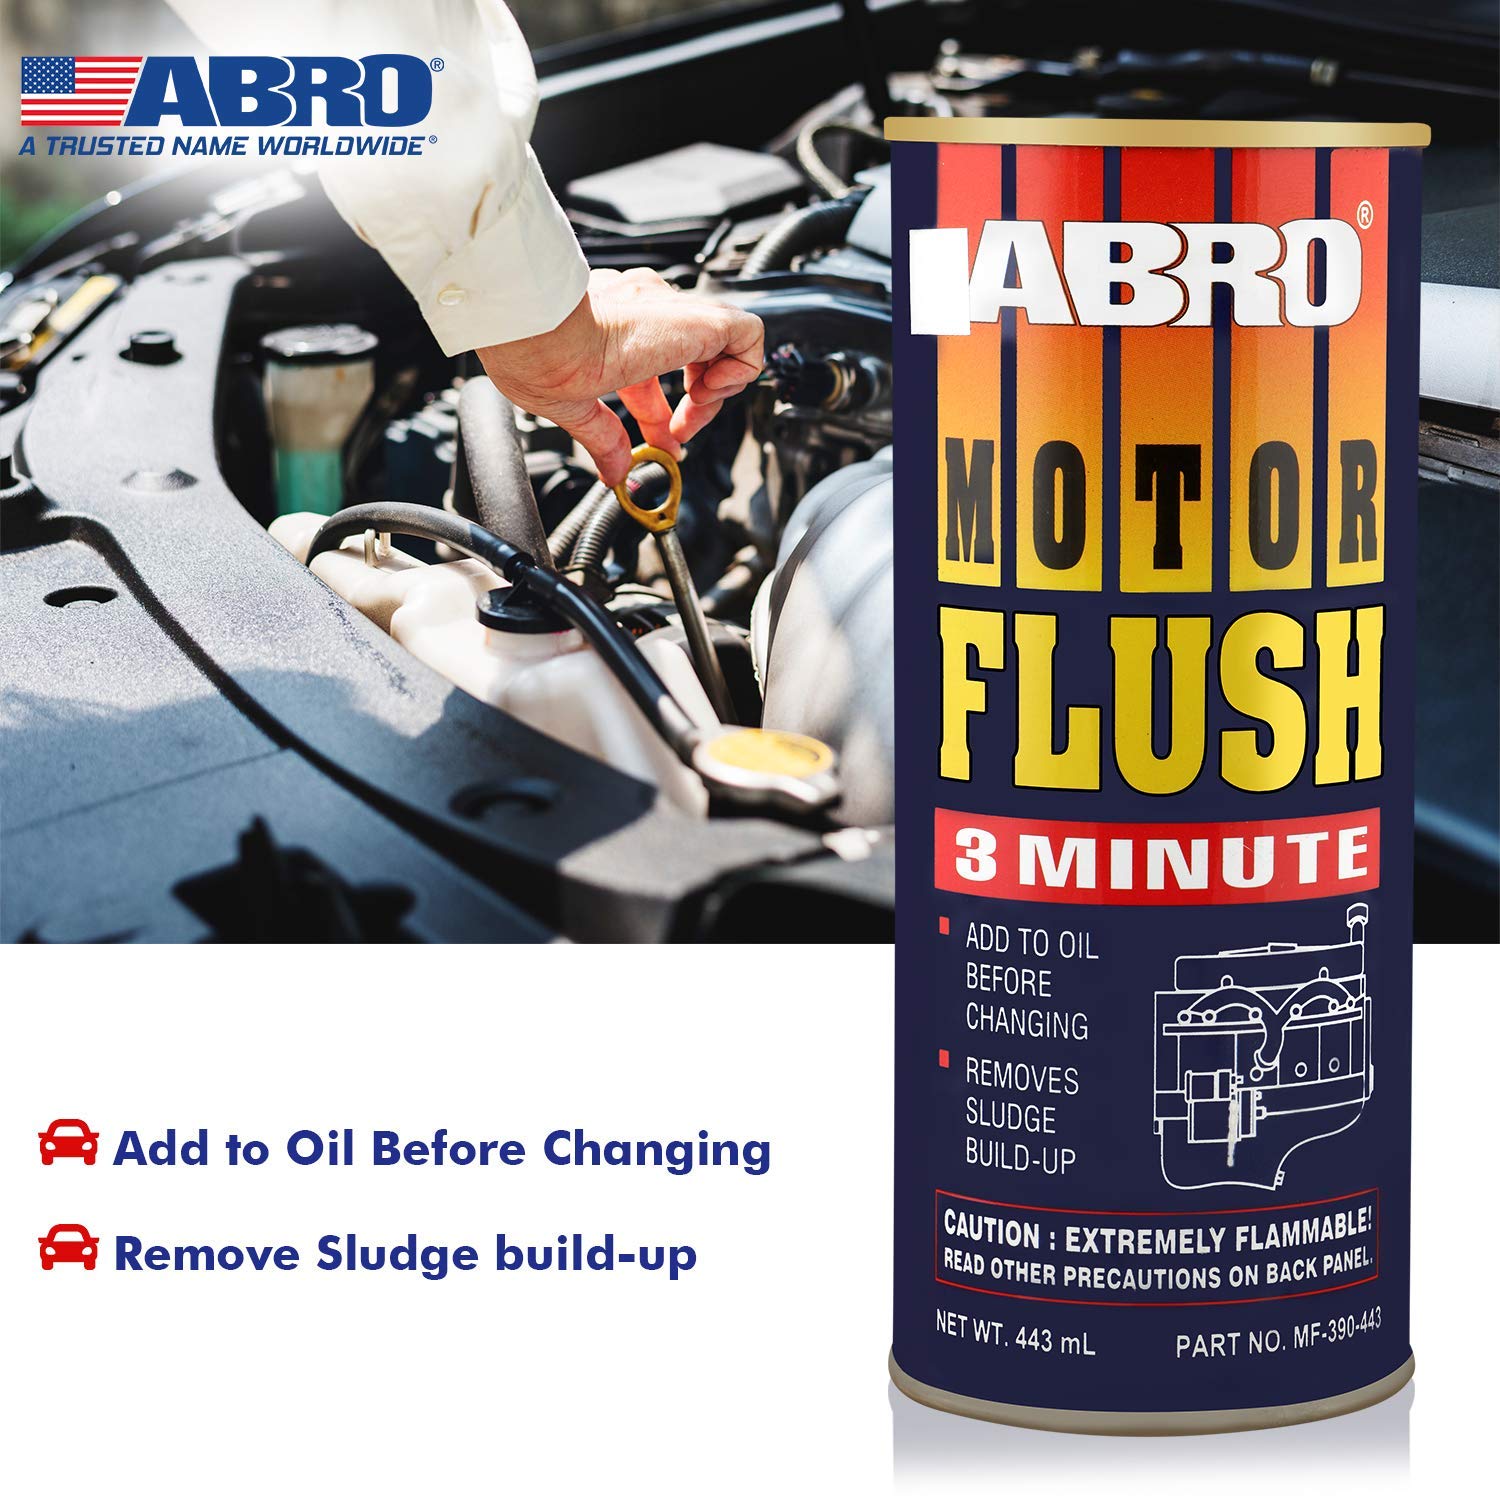 ABRO Heavy Duty Spray Adhesive, Multipurpose and Repositionable